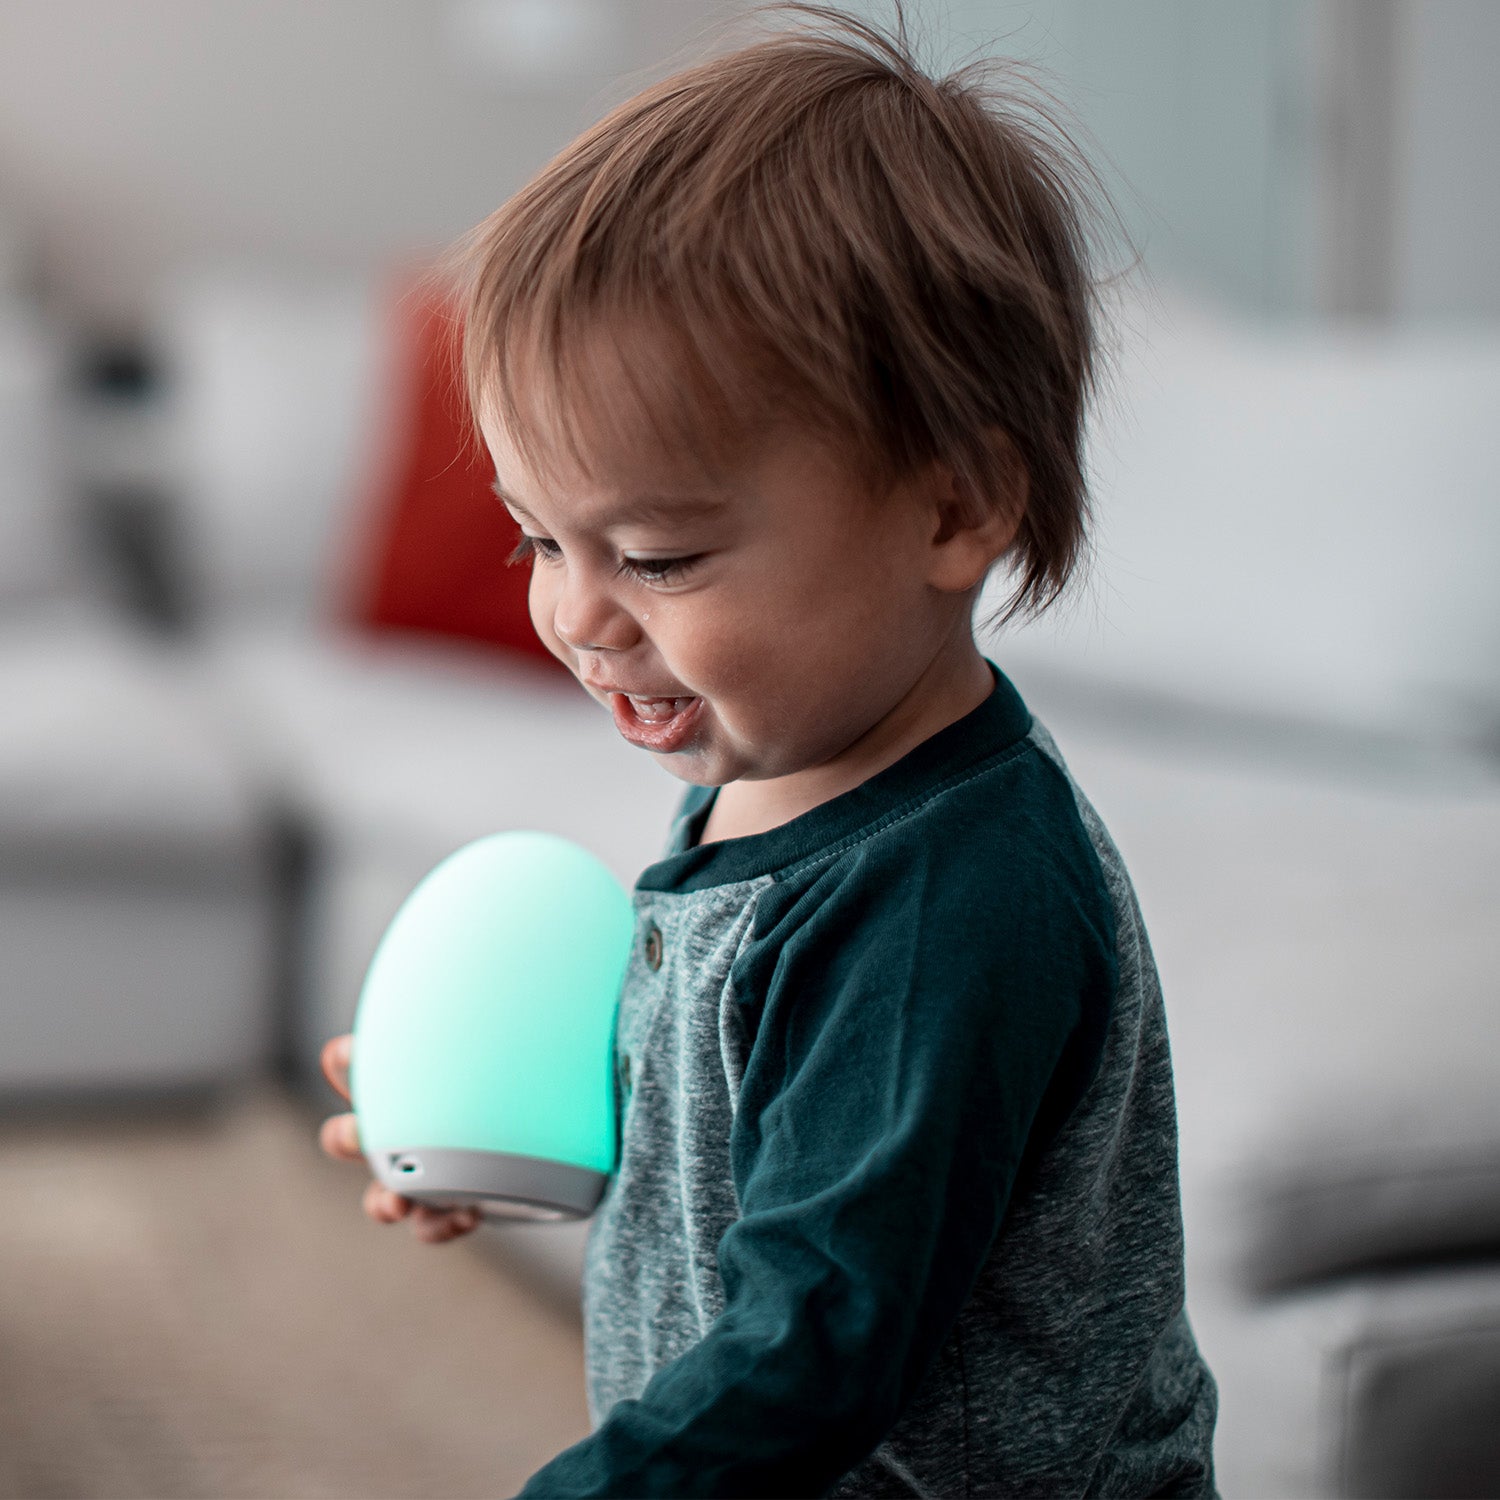 Toddler boy smiling and holding a green VAVA baby night light